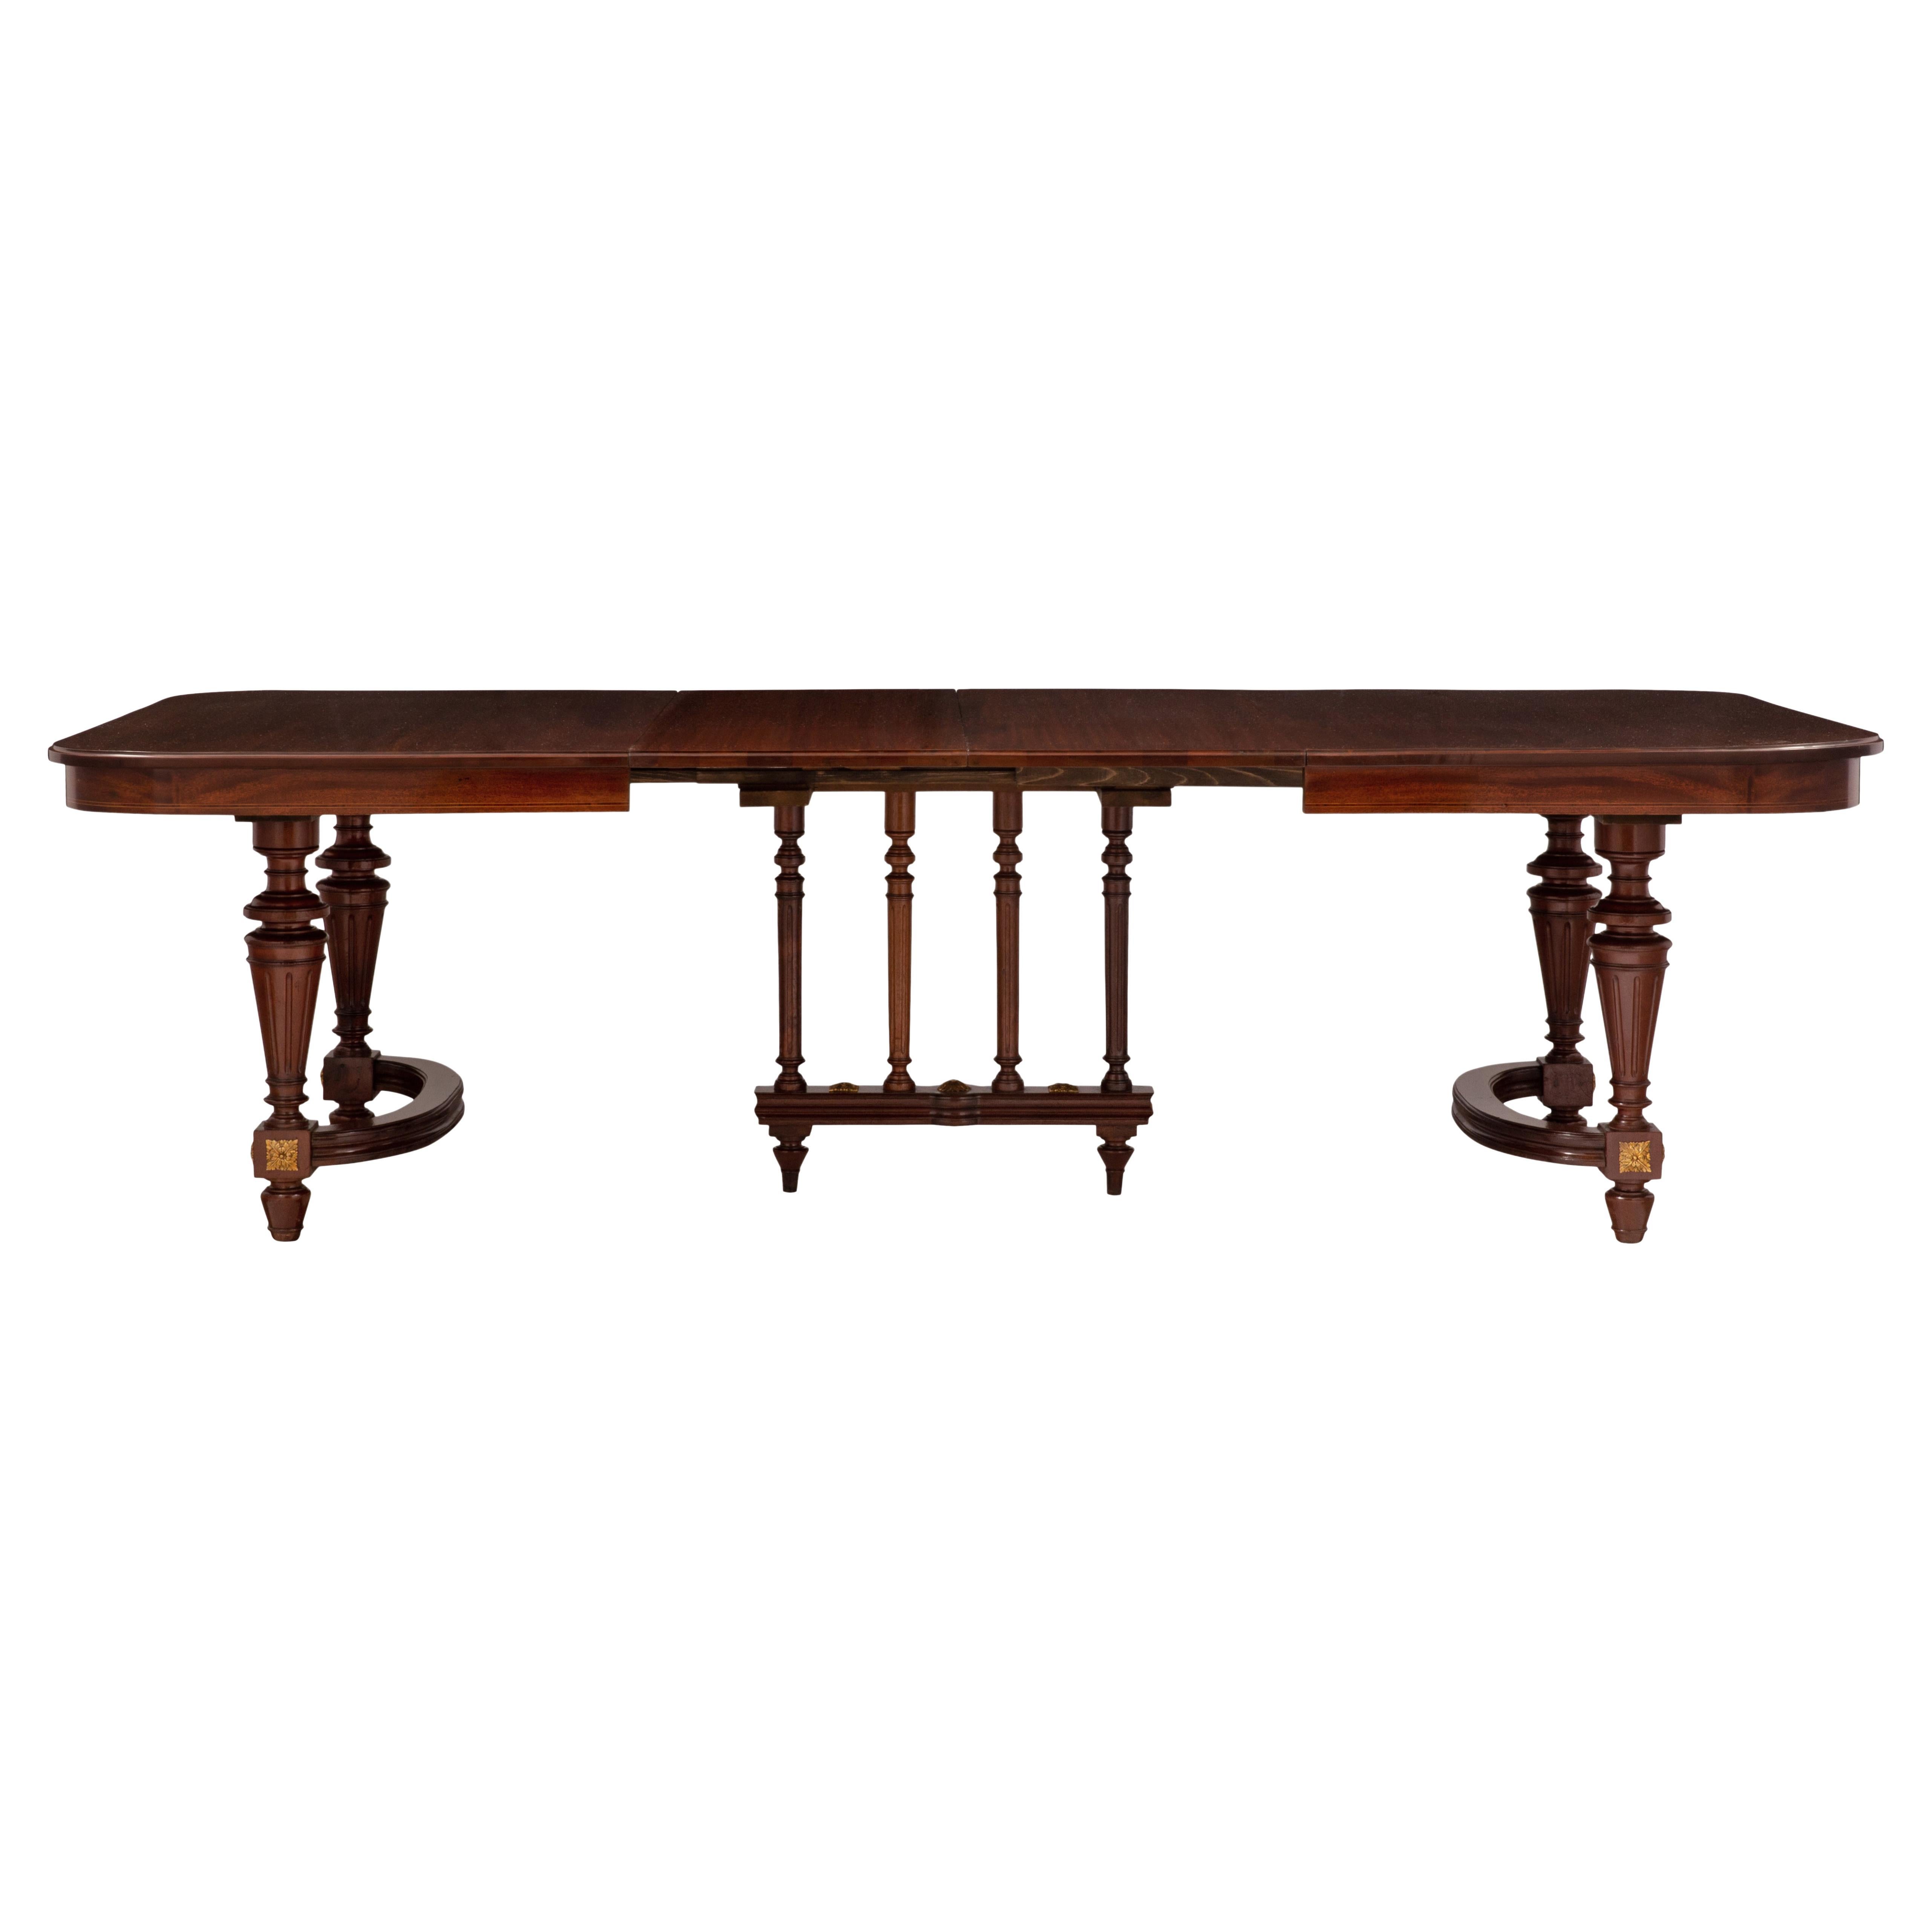 French 19th Century Louis XVI Style Mahogany Dining Table with Two Extensions For Sale